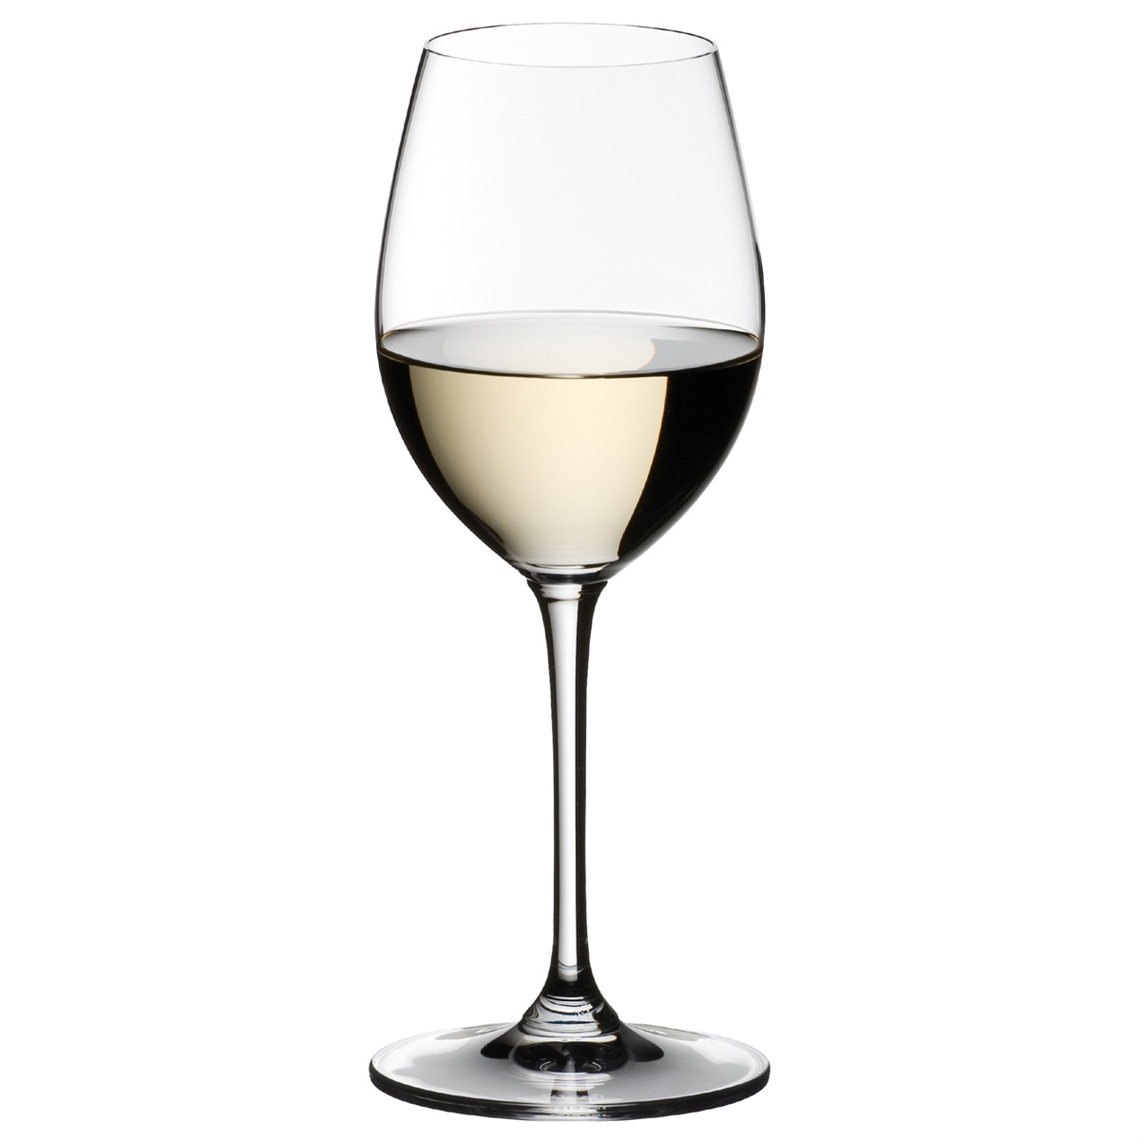 View more red wine glasses from our Dessert Wine Glasses range